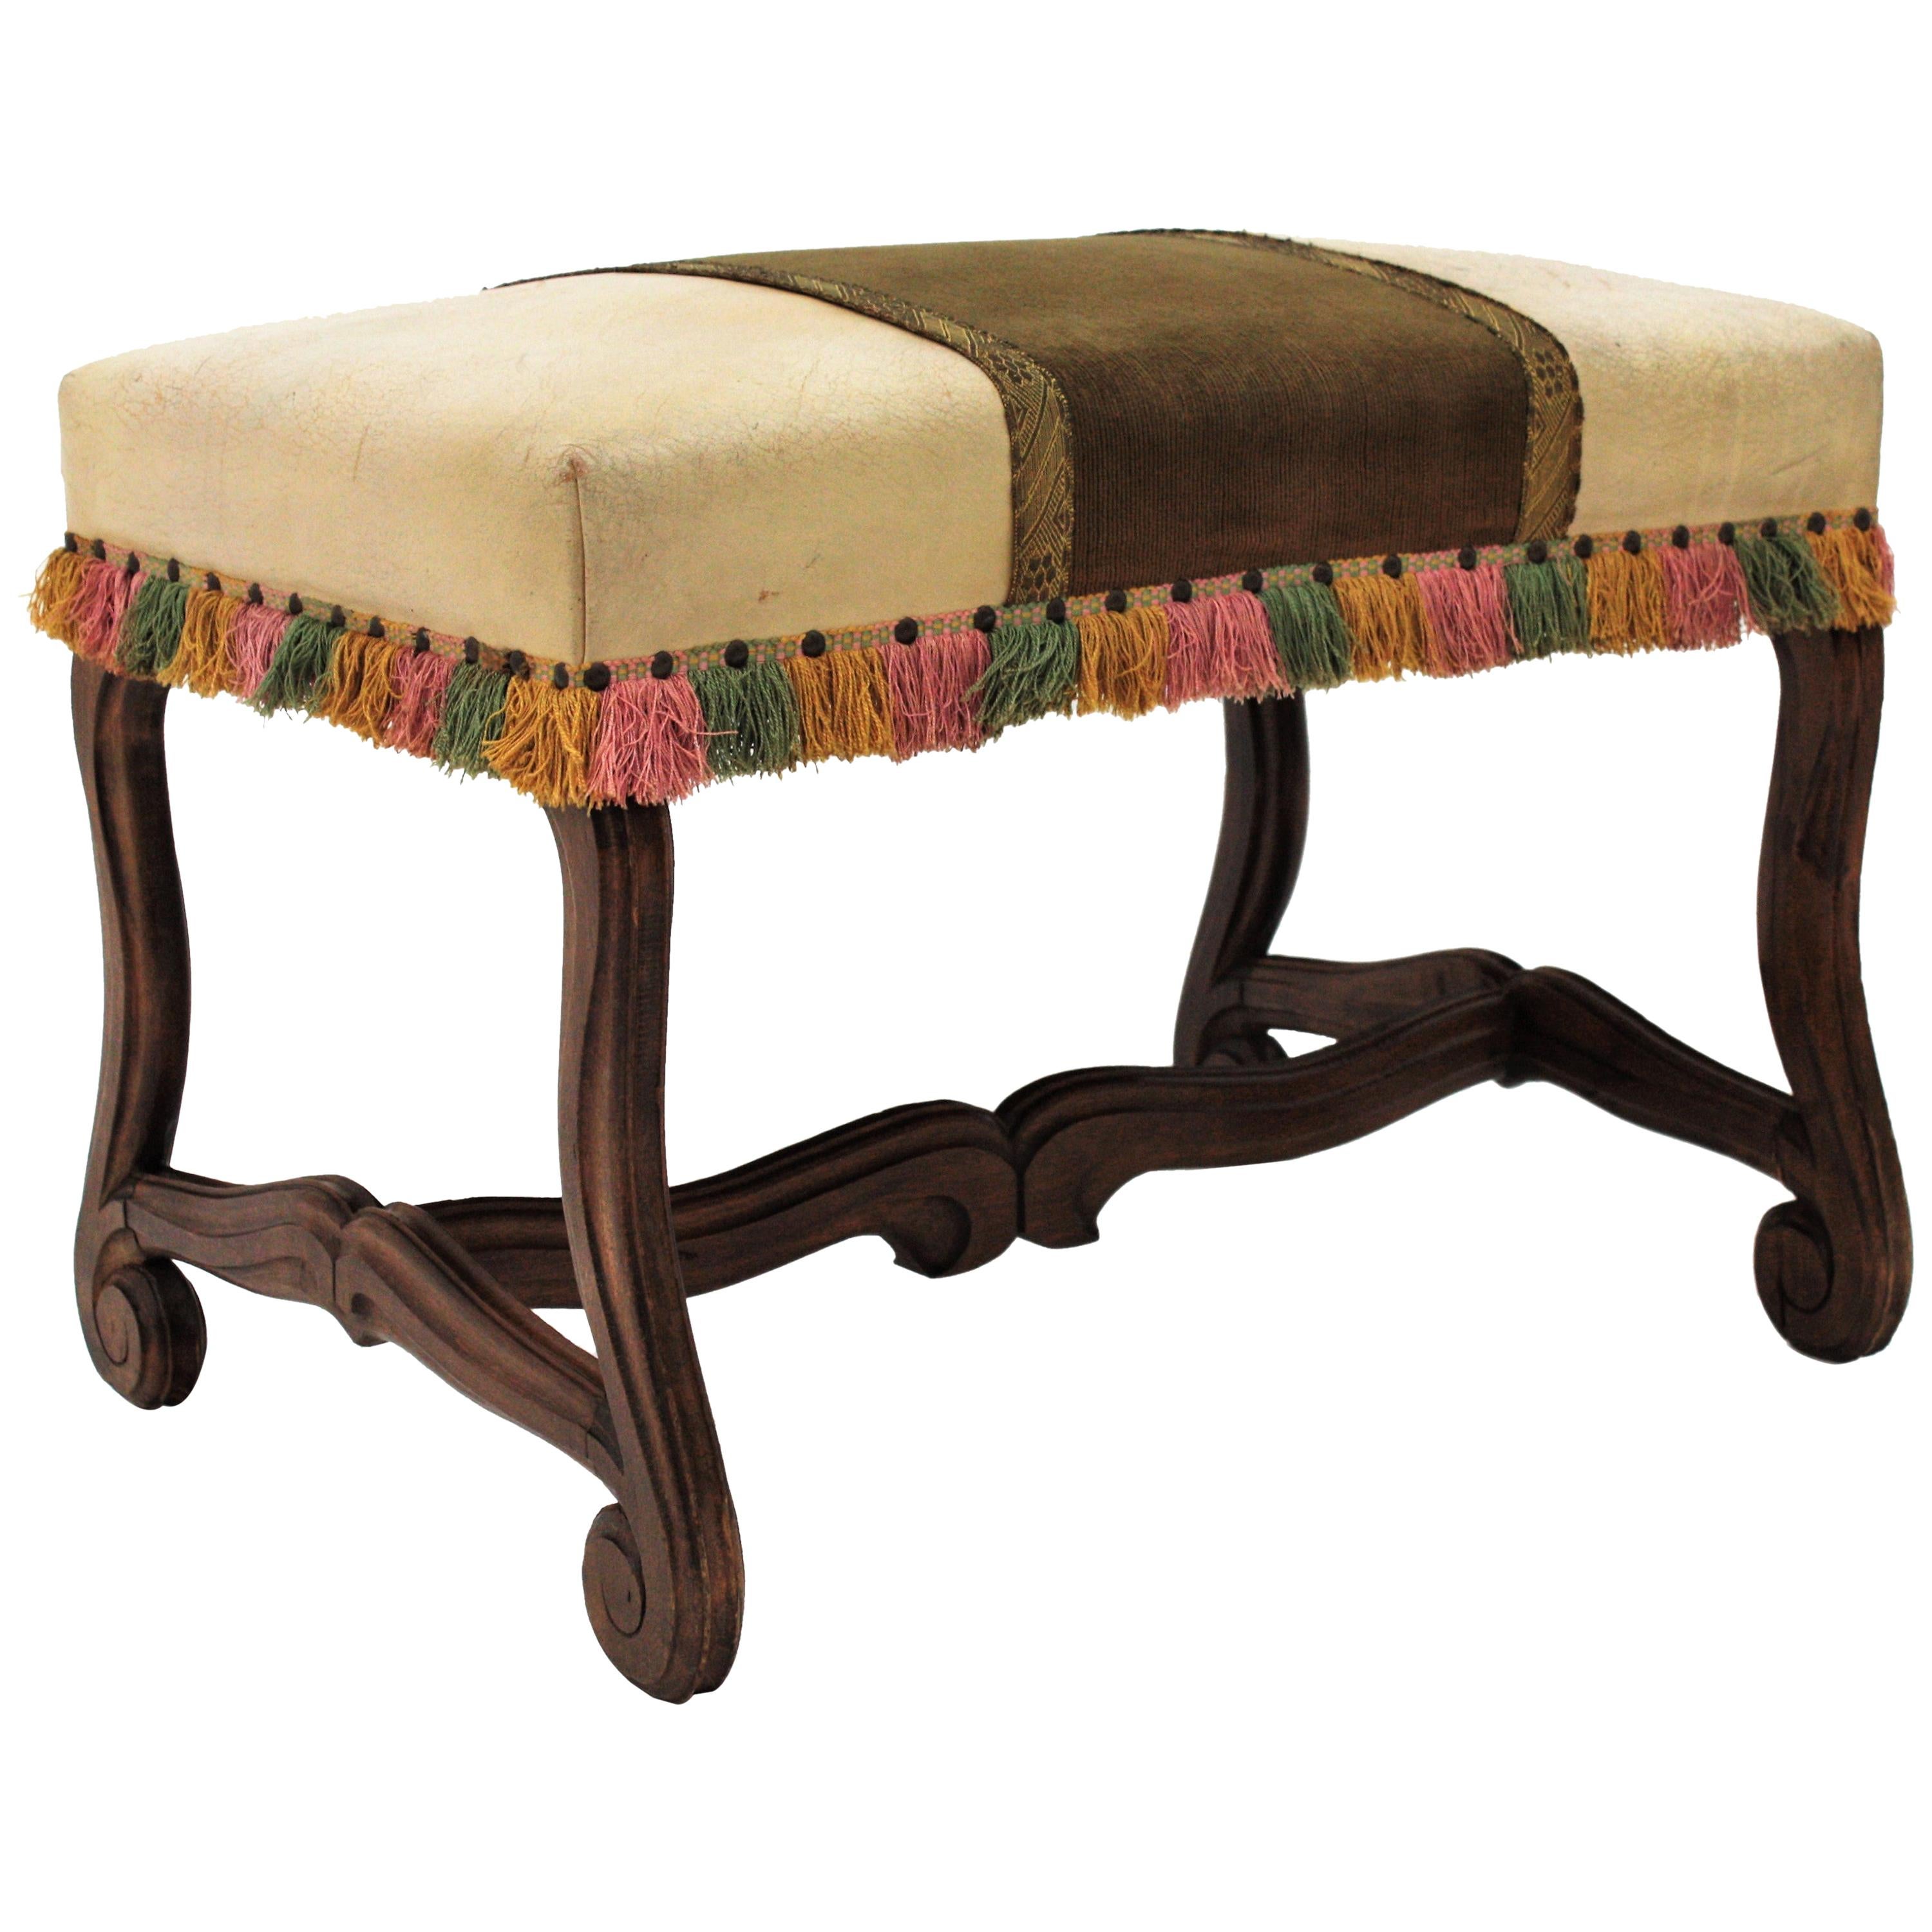 Spanish Os de Mouton Louis XIV Style Walnut Stool or Bench For Sale